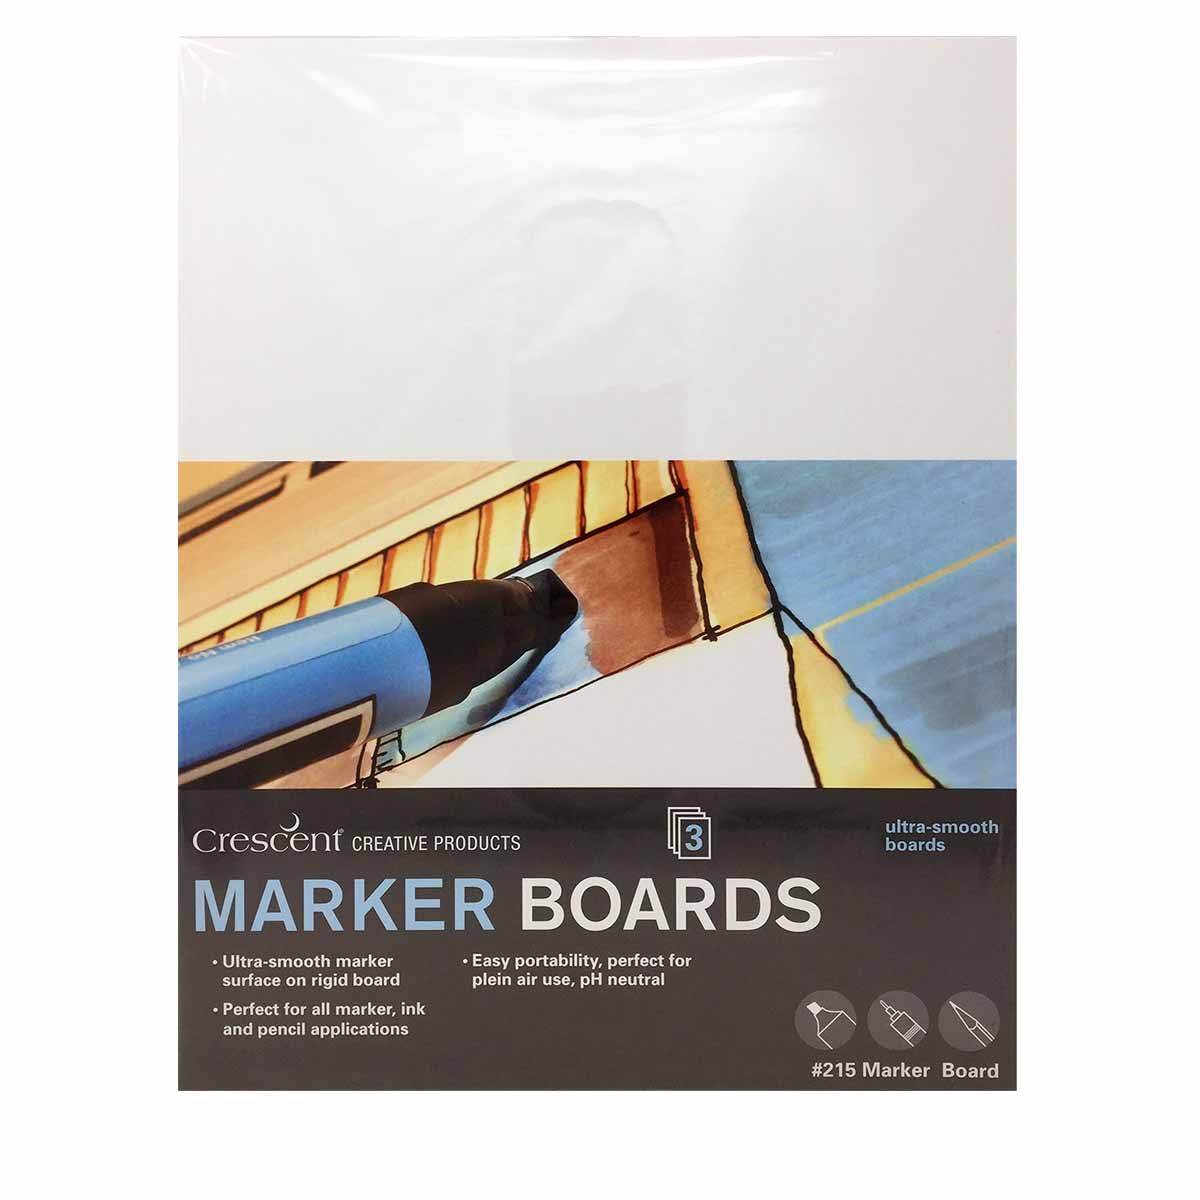 A rigid alternative to marker layout paper